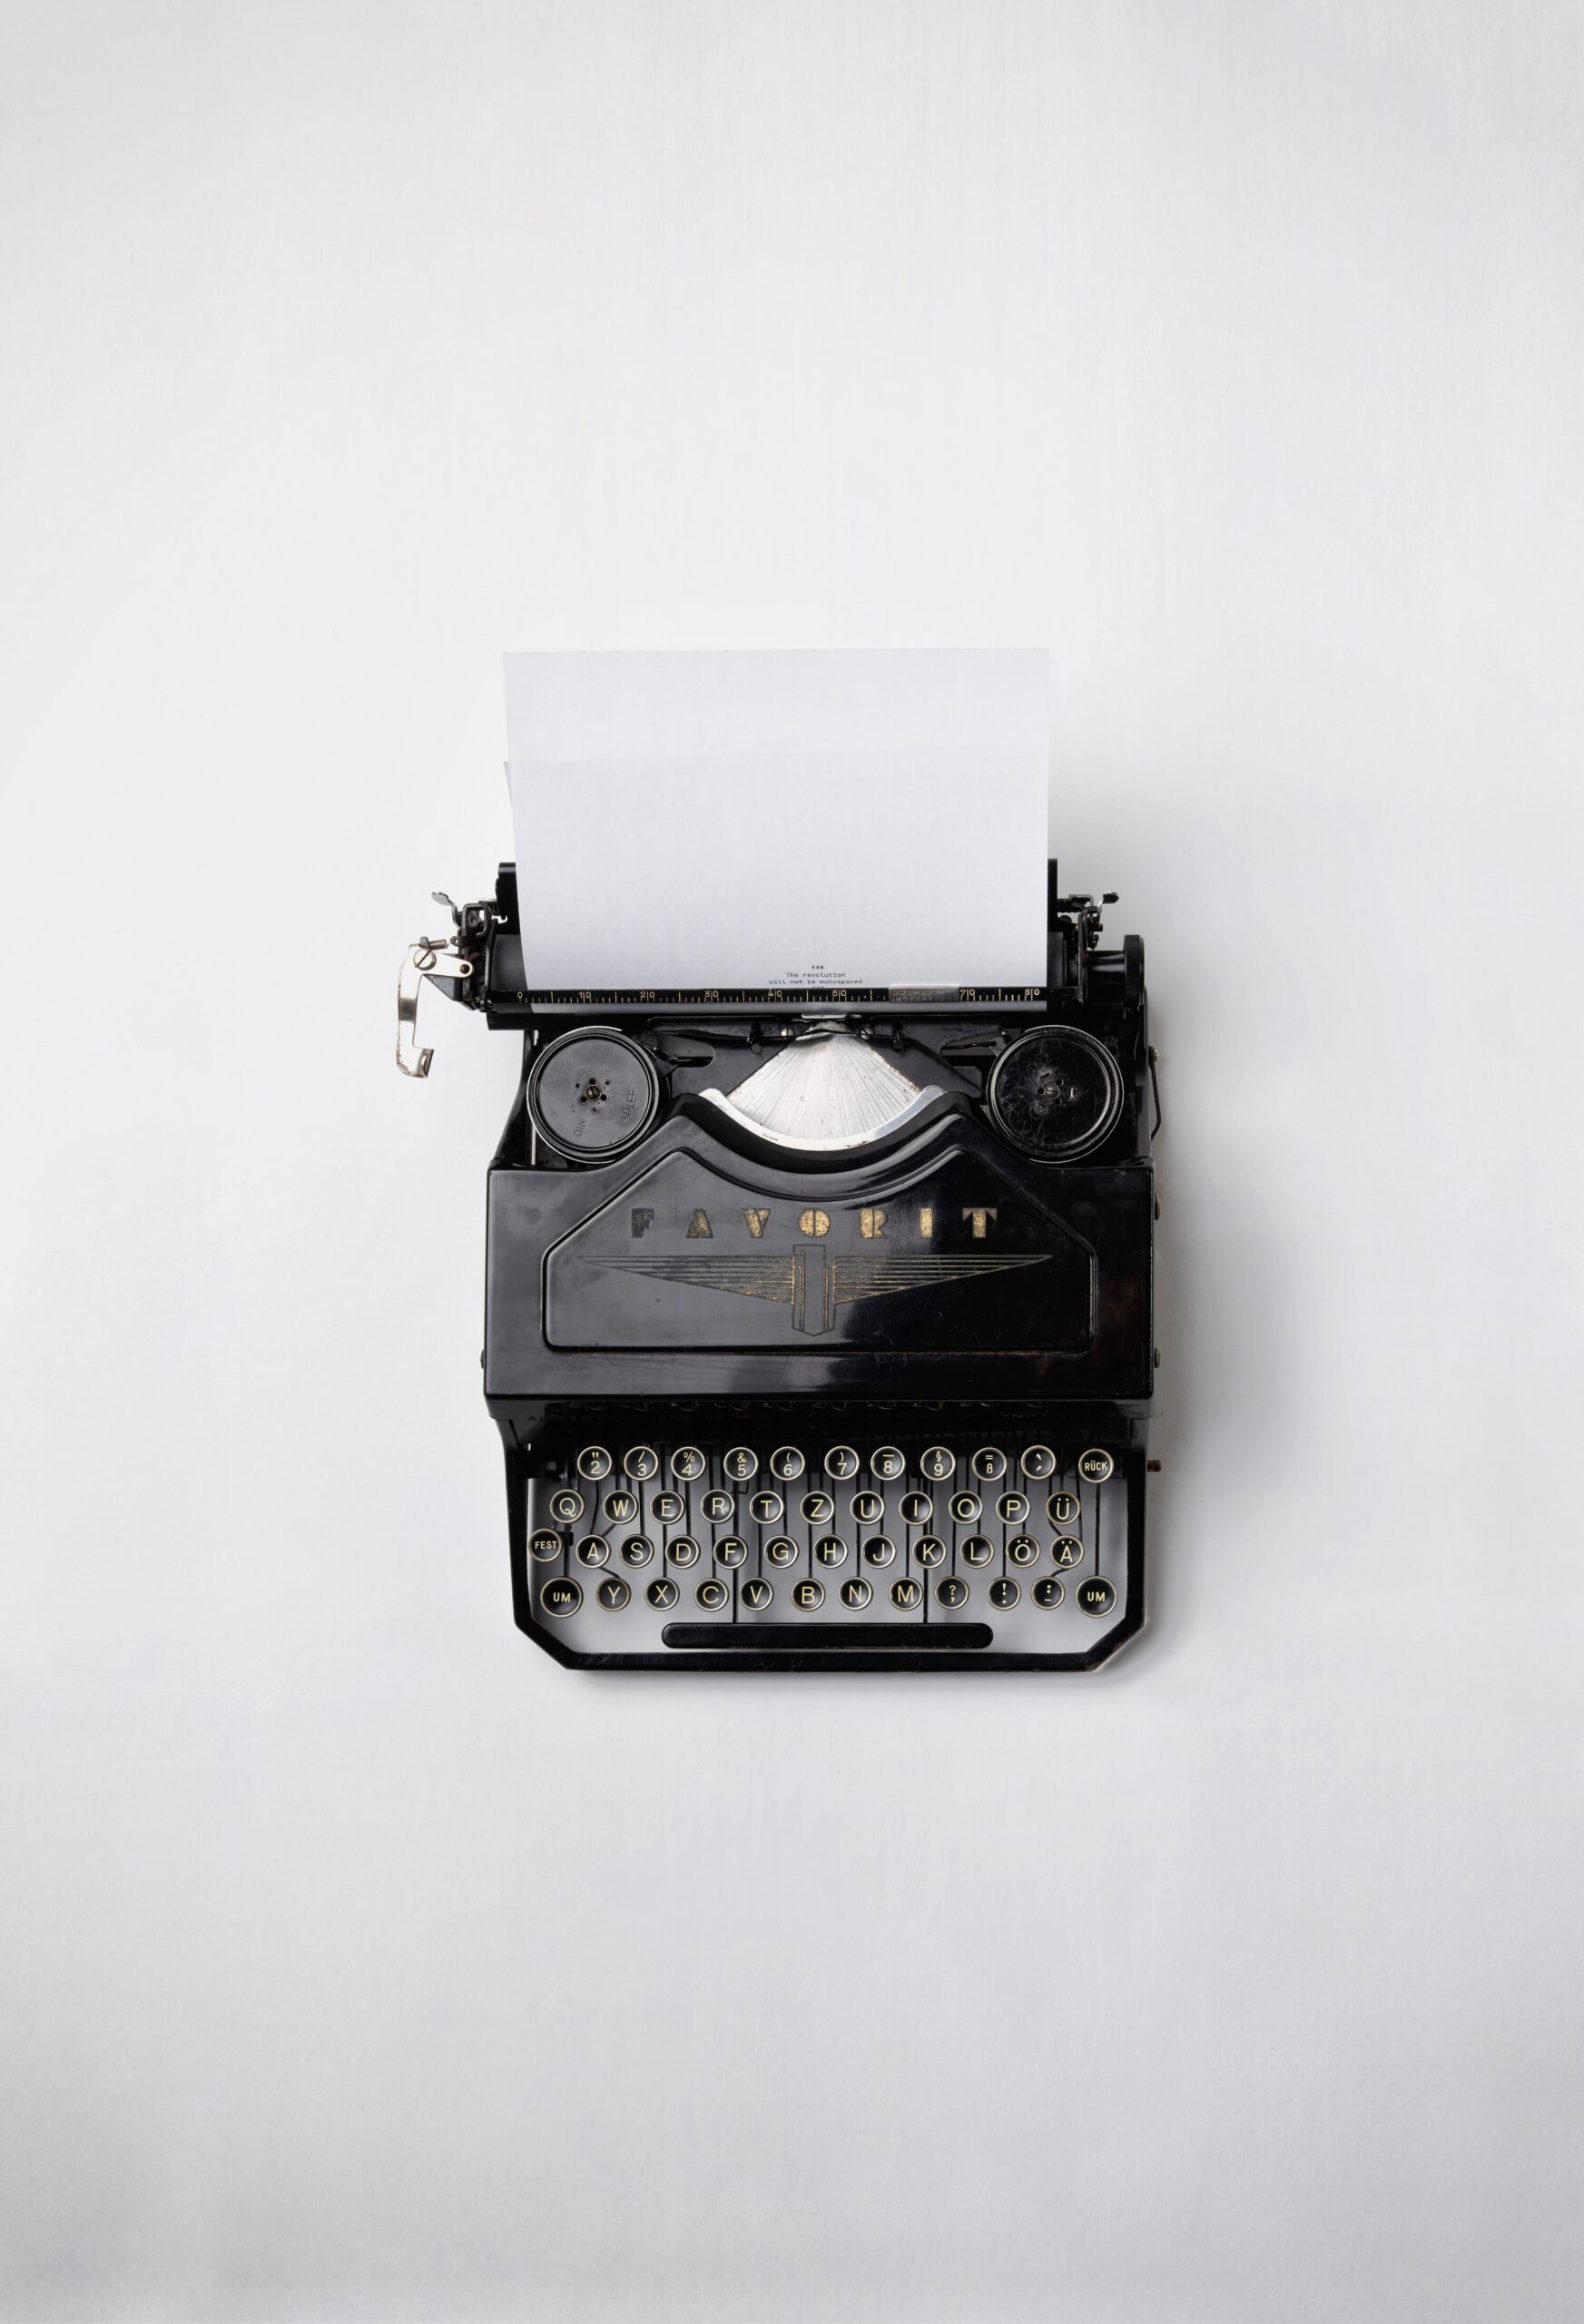 black typewriter with paper sticking out of it and a white background behind it.